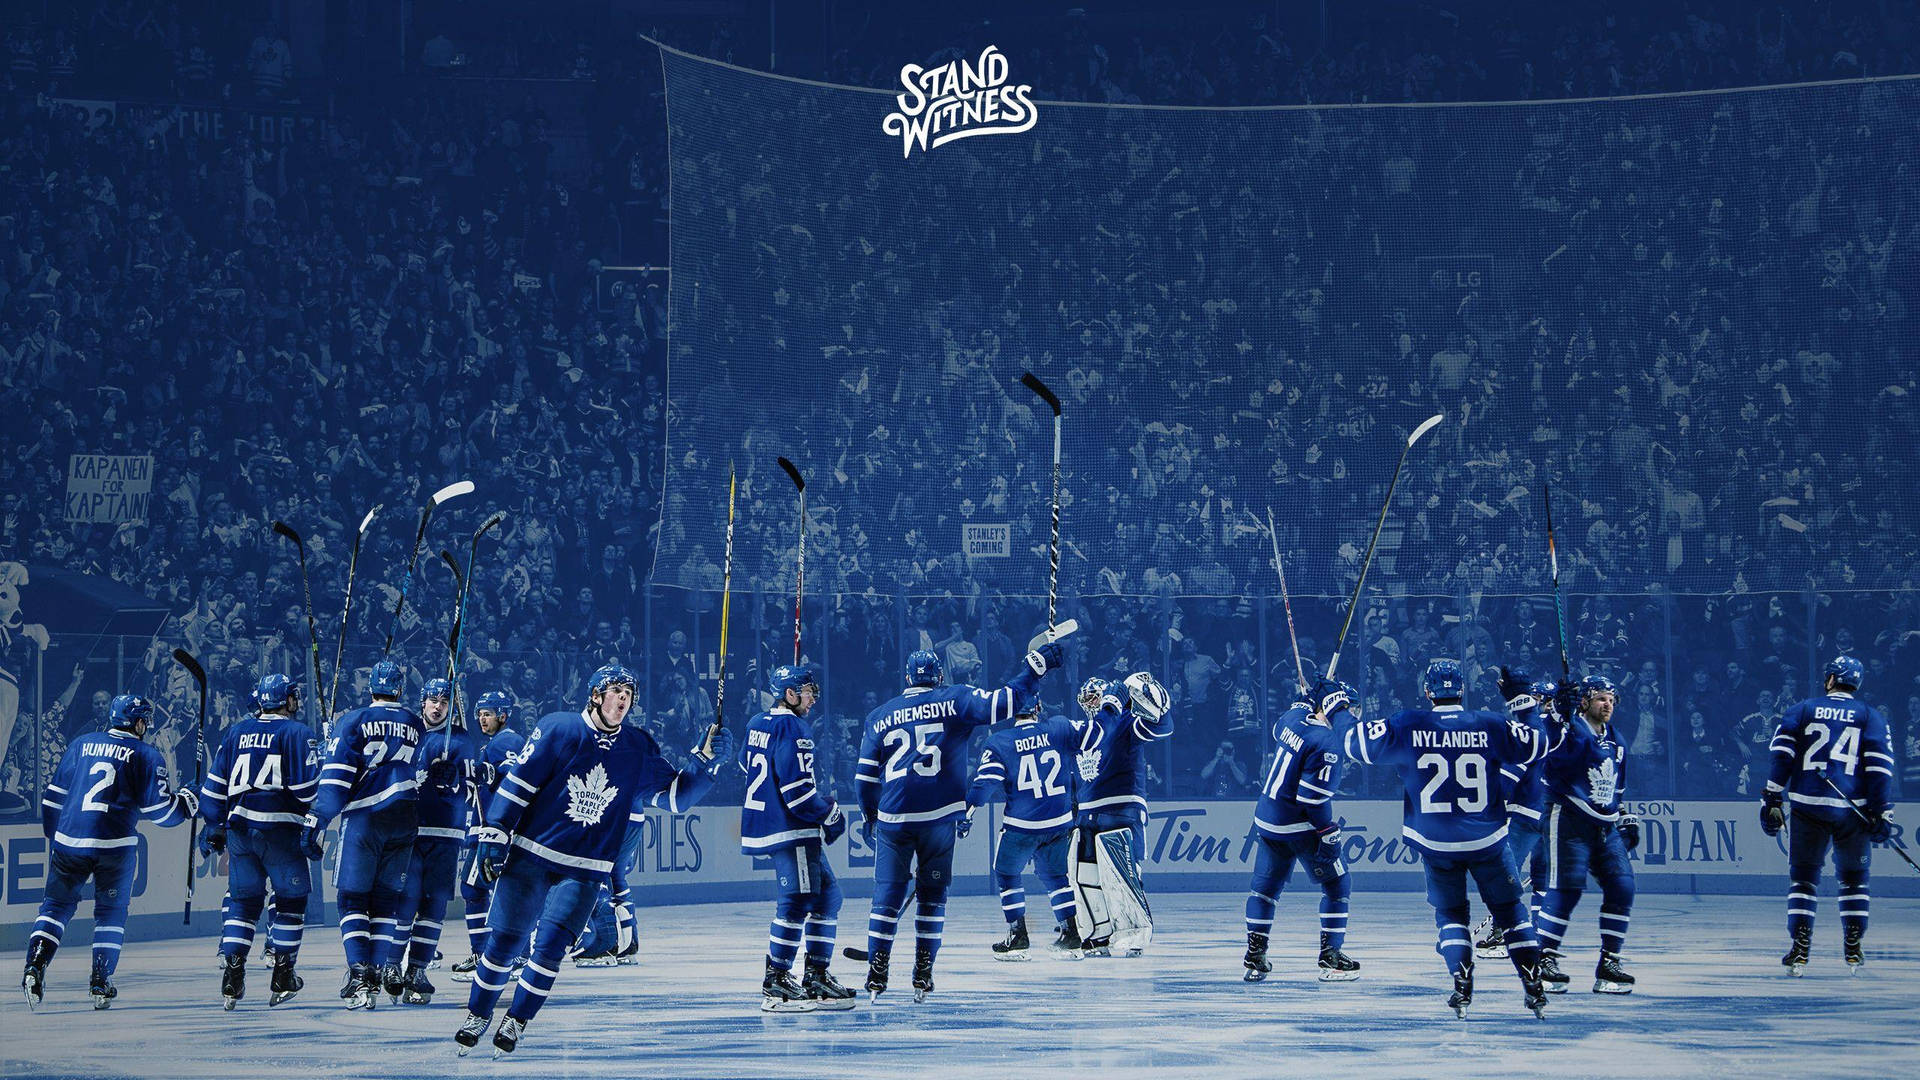 Toronto Maple Leafs Players Victory Wallpaper